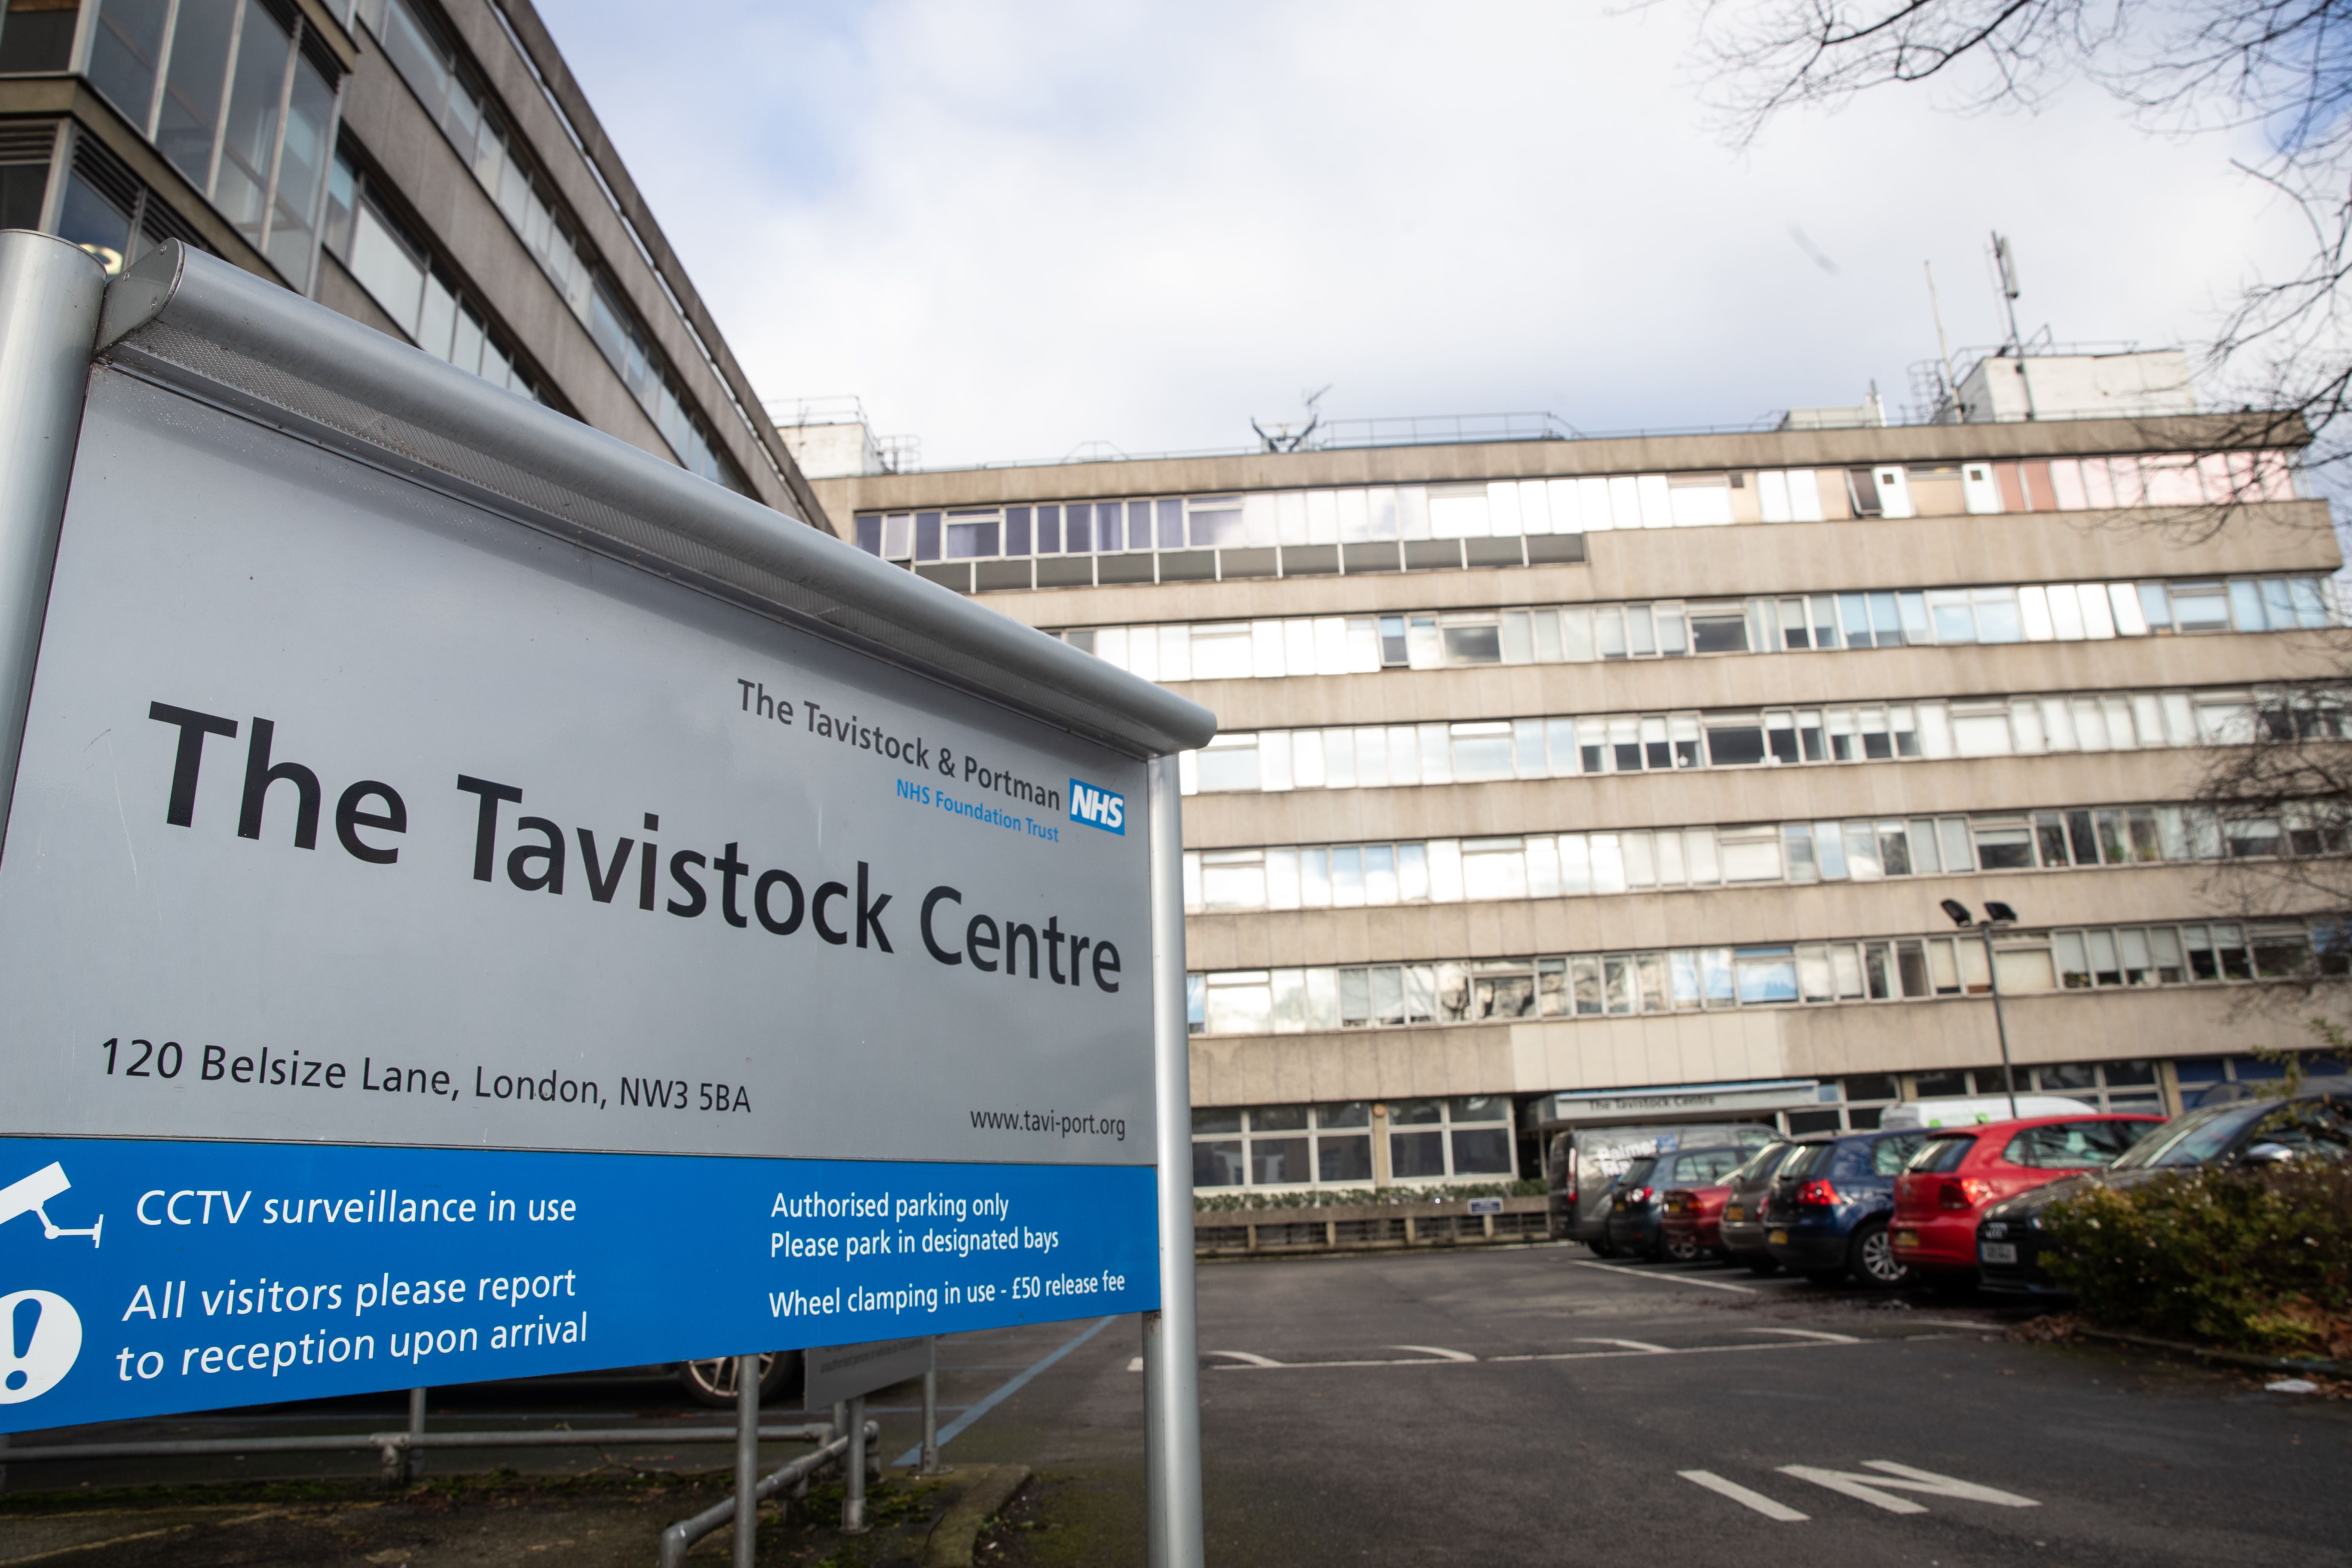 The gender identity service at the Tavistock Trust has been closed